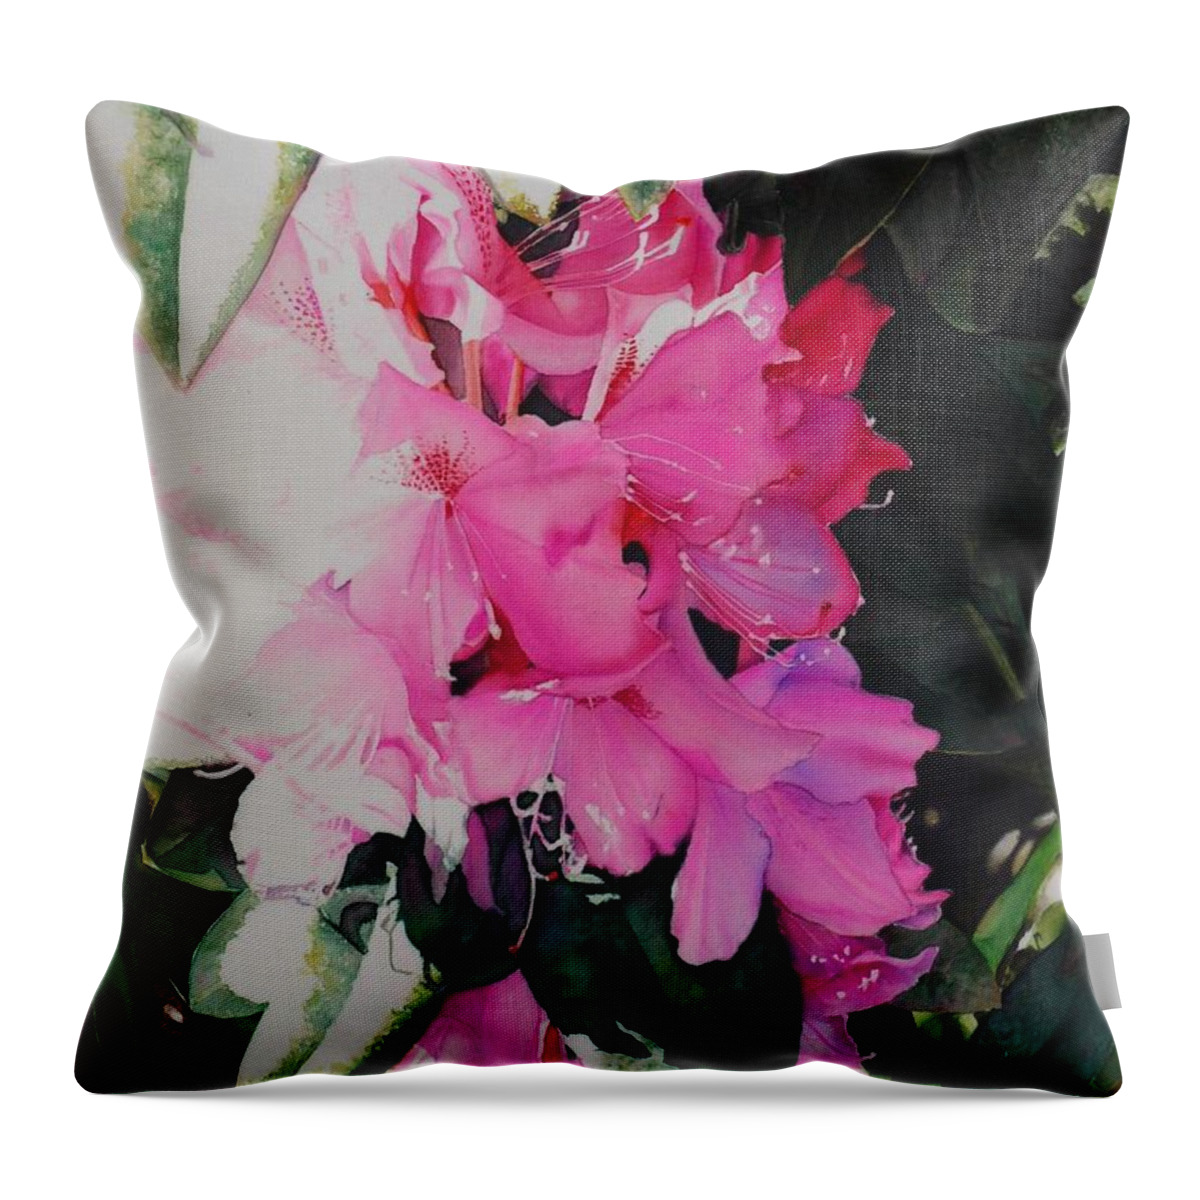  Throw Pillow featuring the painting Rhodies by Barbara Pease